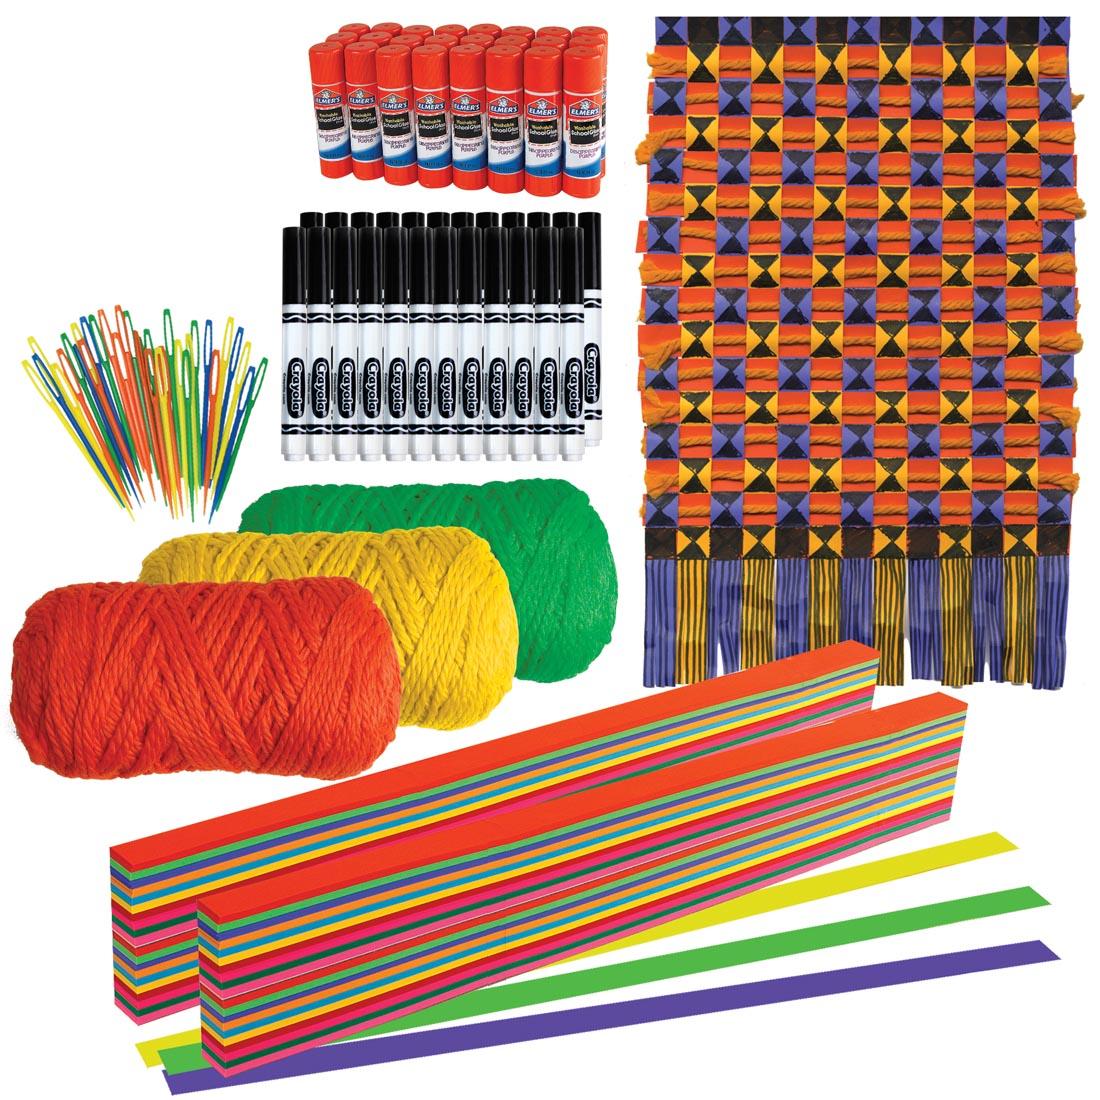 Contents of the Paper Strip Kente Weaving Project Kit plus an example of a completed project